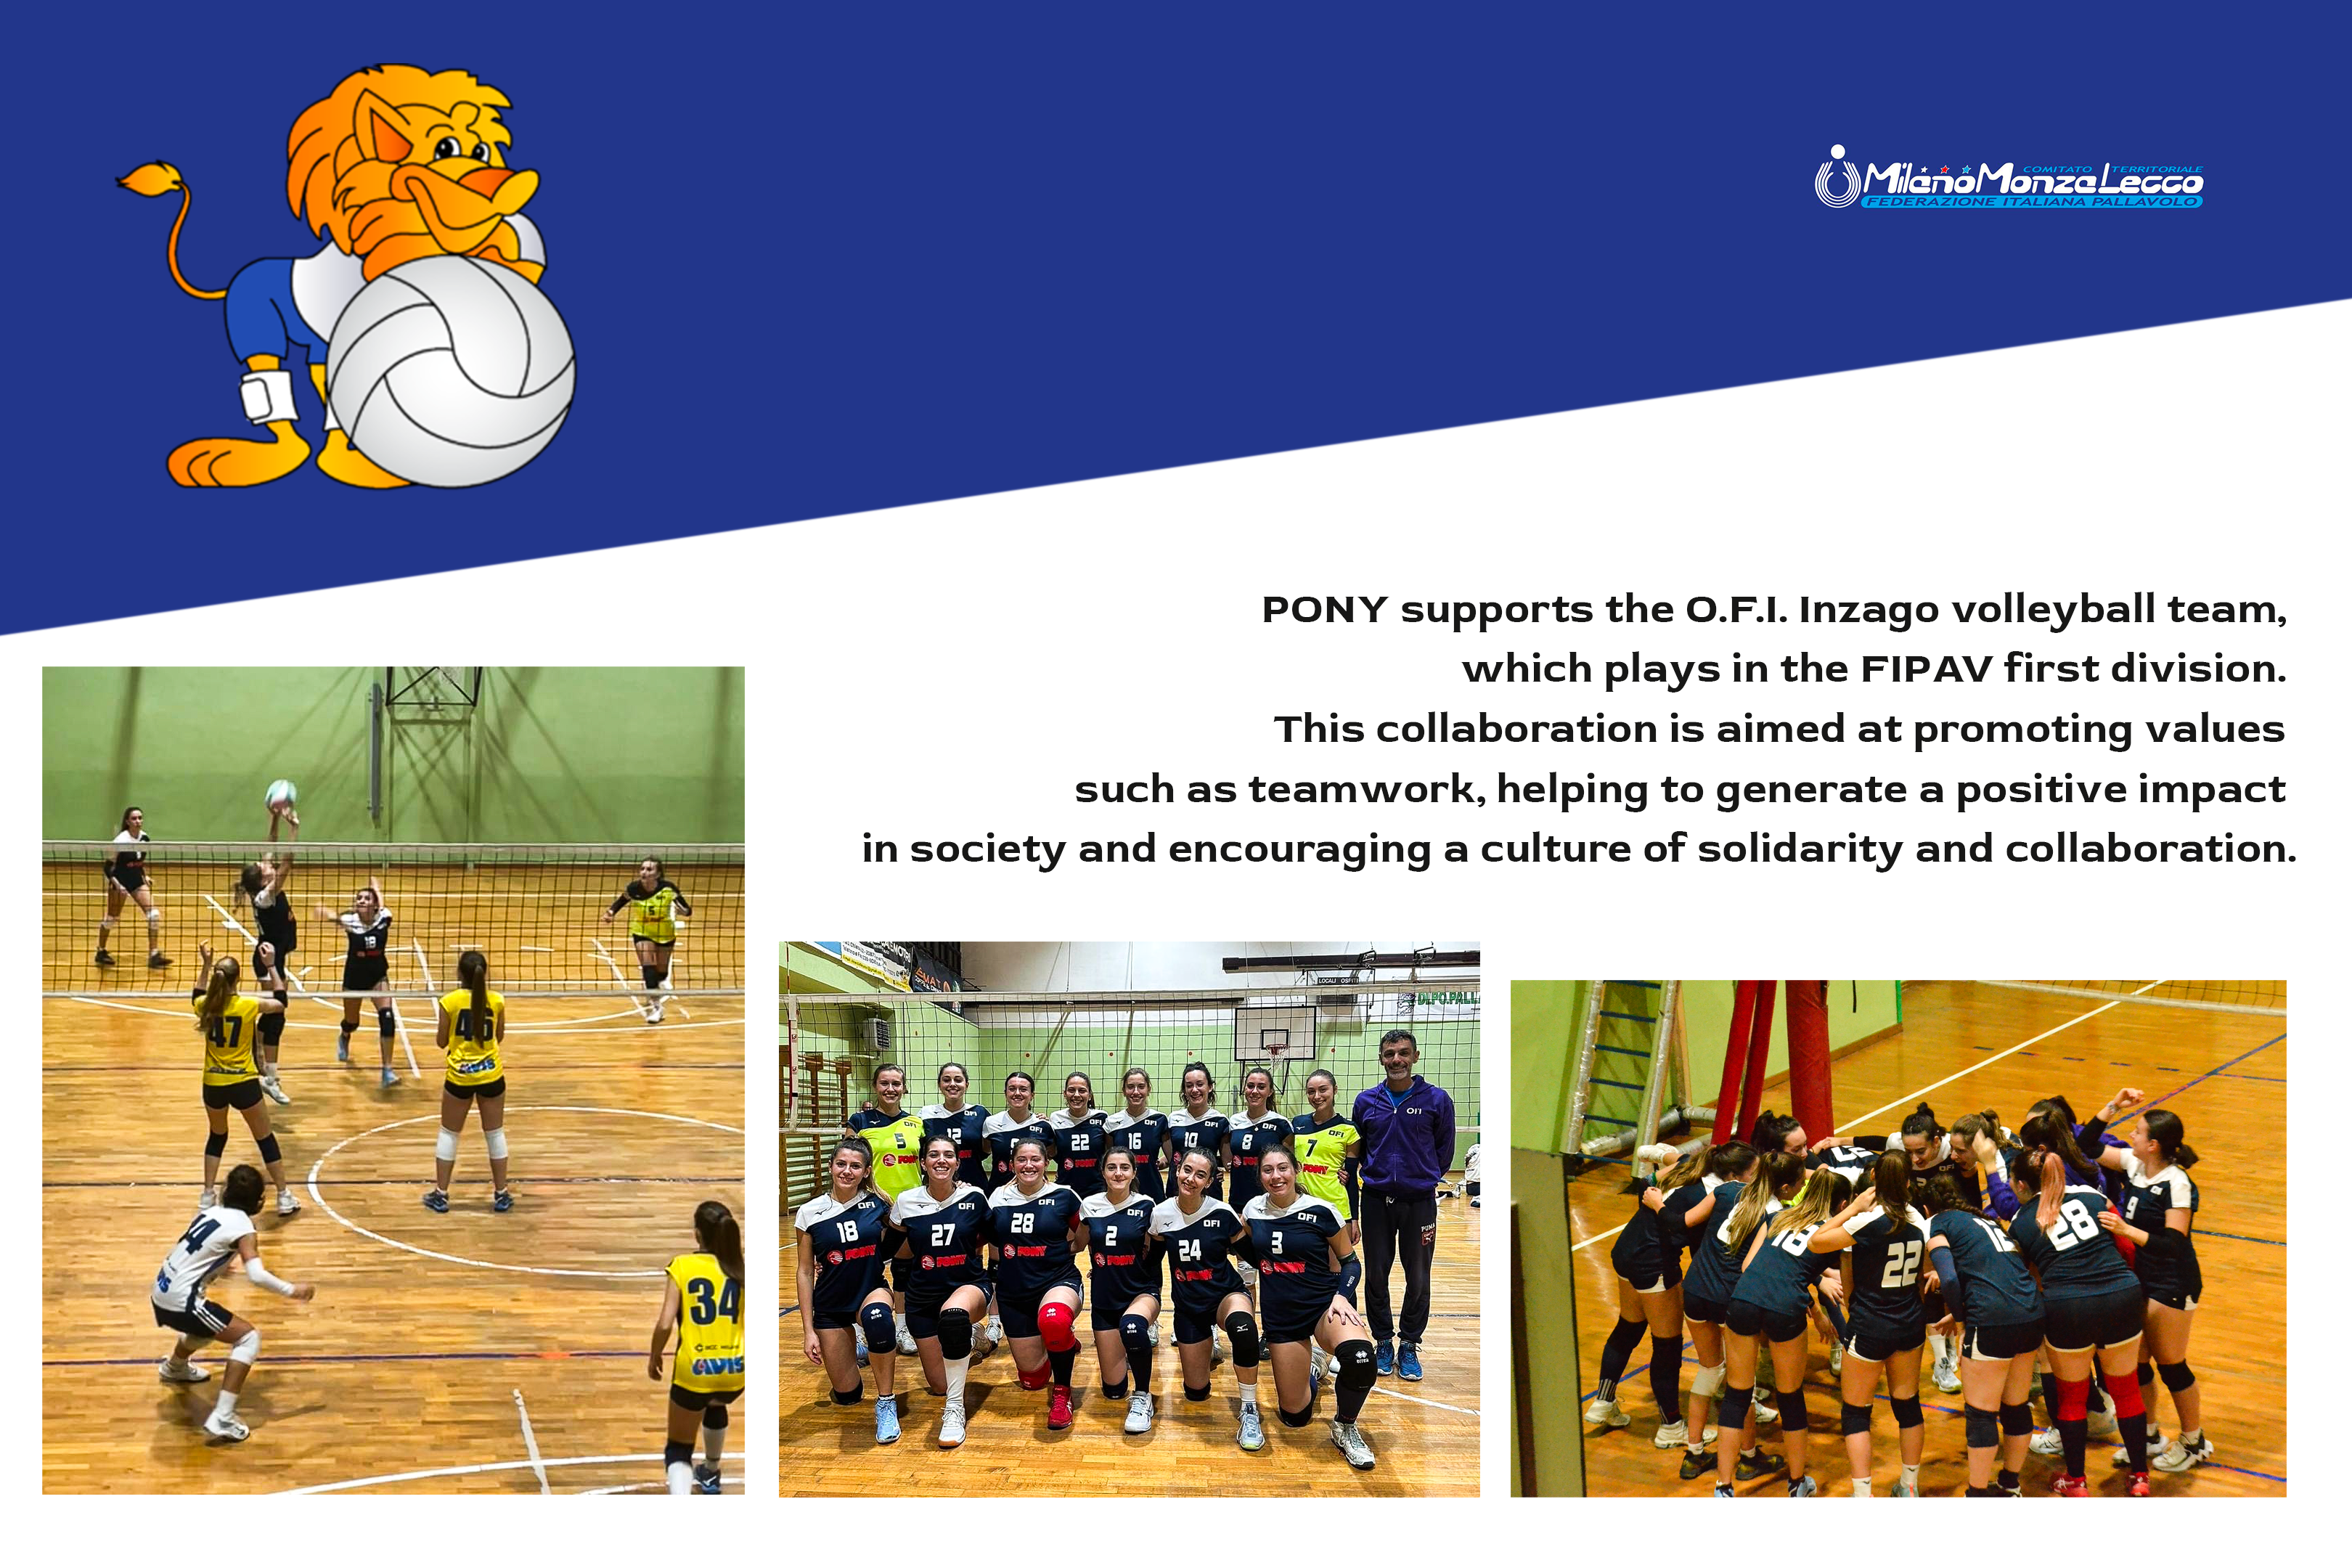 PONY supports the O.F.I. Inzago volleyball team